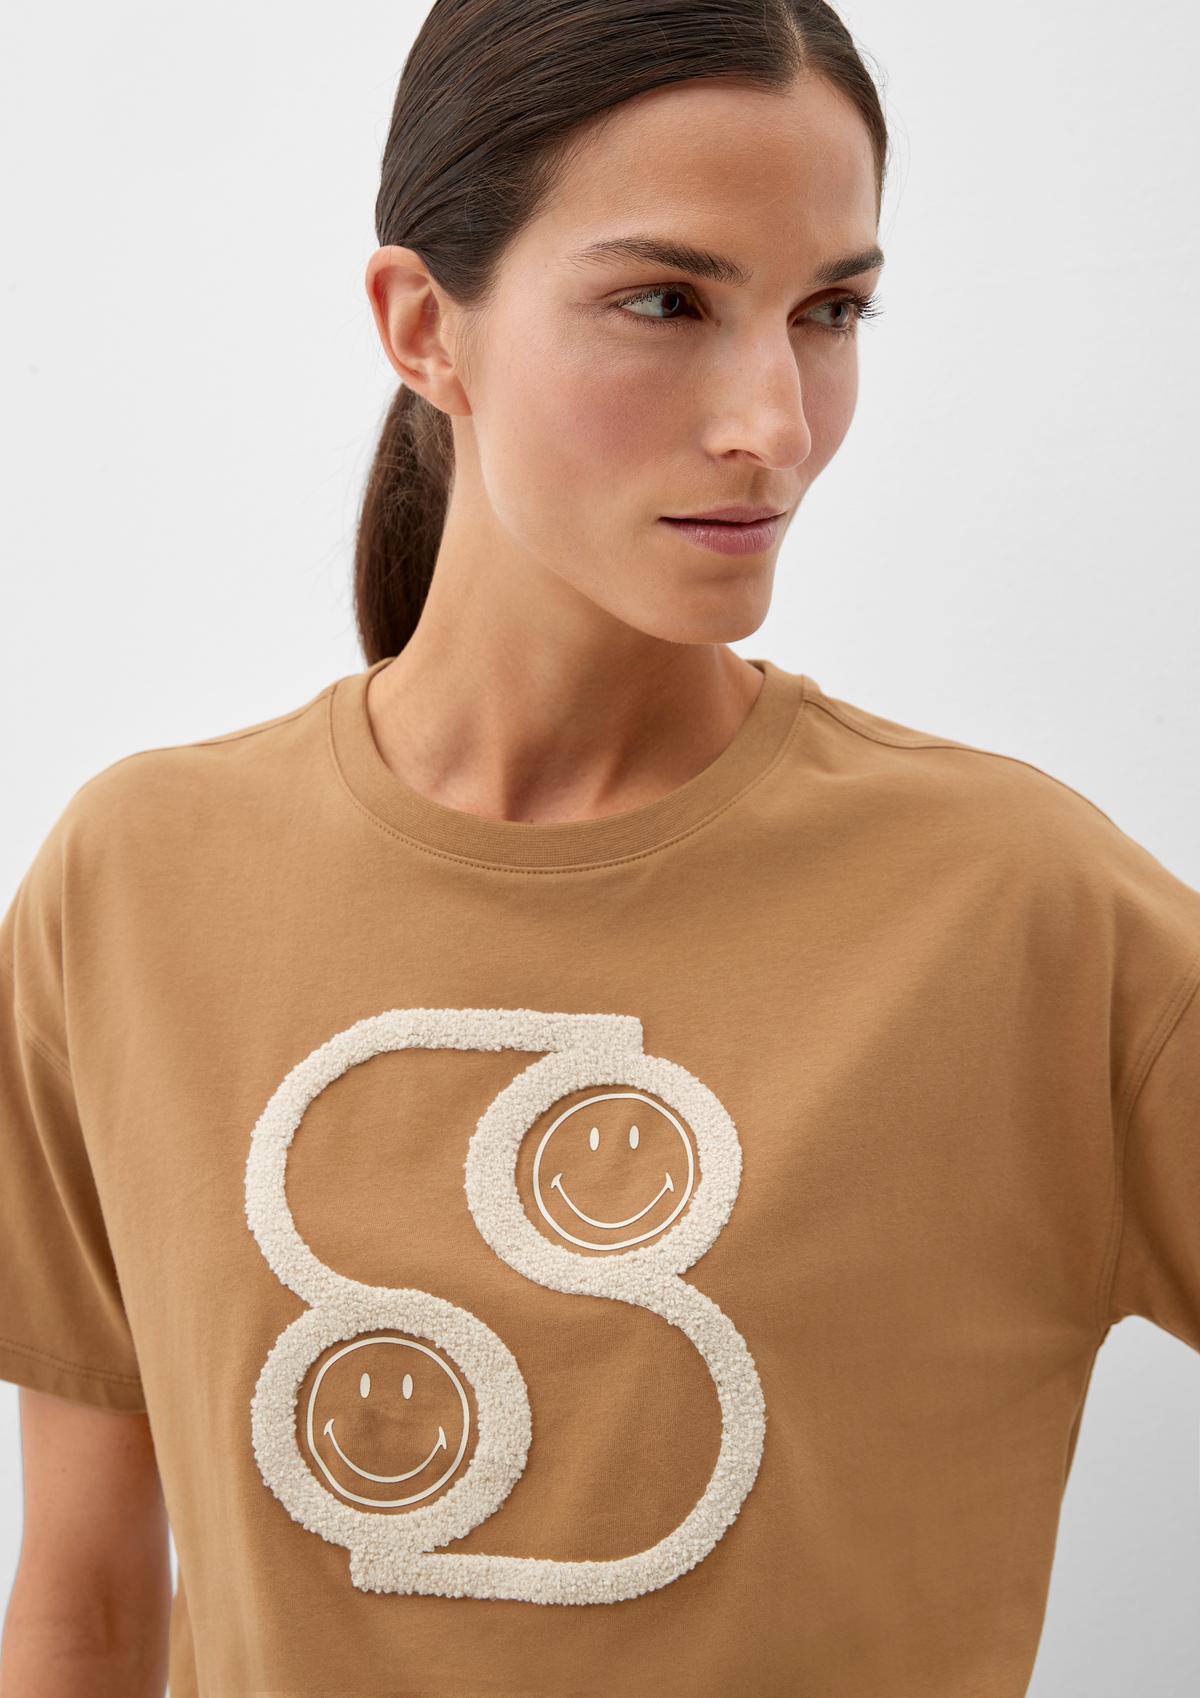 s.Oliver T-shirt with a Smiley® print